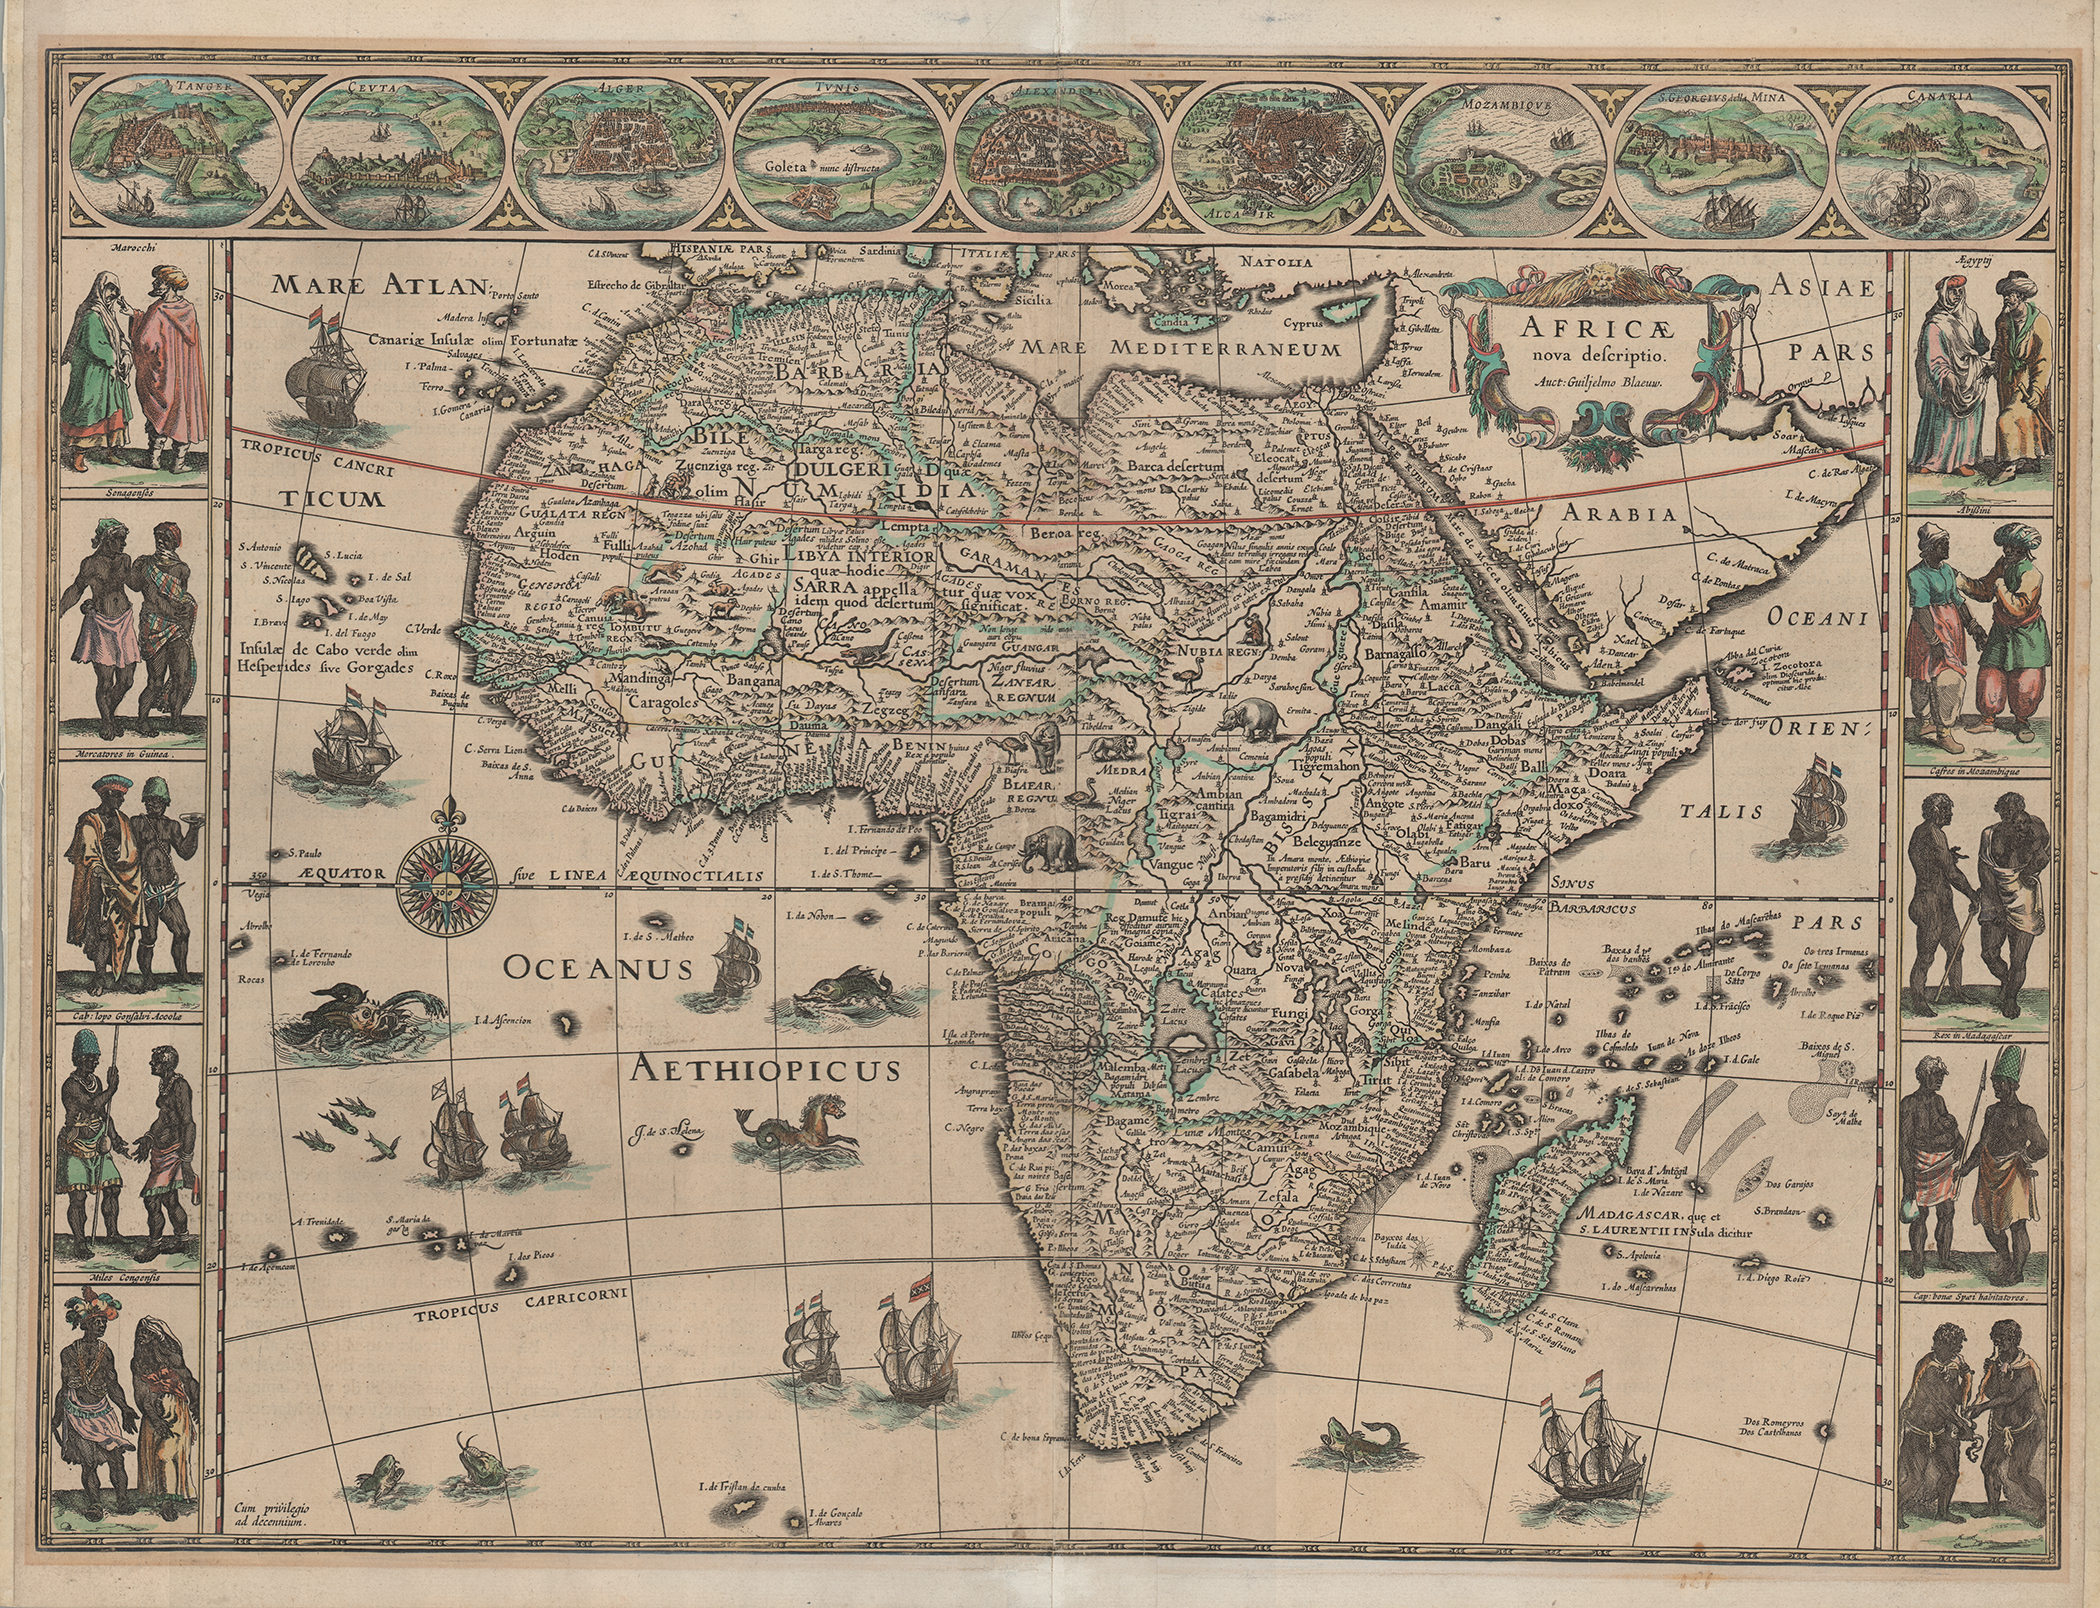 Figure 1: Willem Janz Blaeu, Africa Nova Descripto, 1621. UTA Libraries Special Collections. Currently on view in Searching for Africa exhibition at Special Collections. 